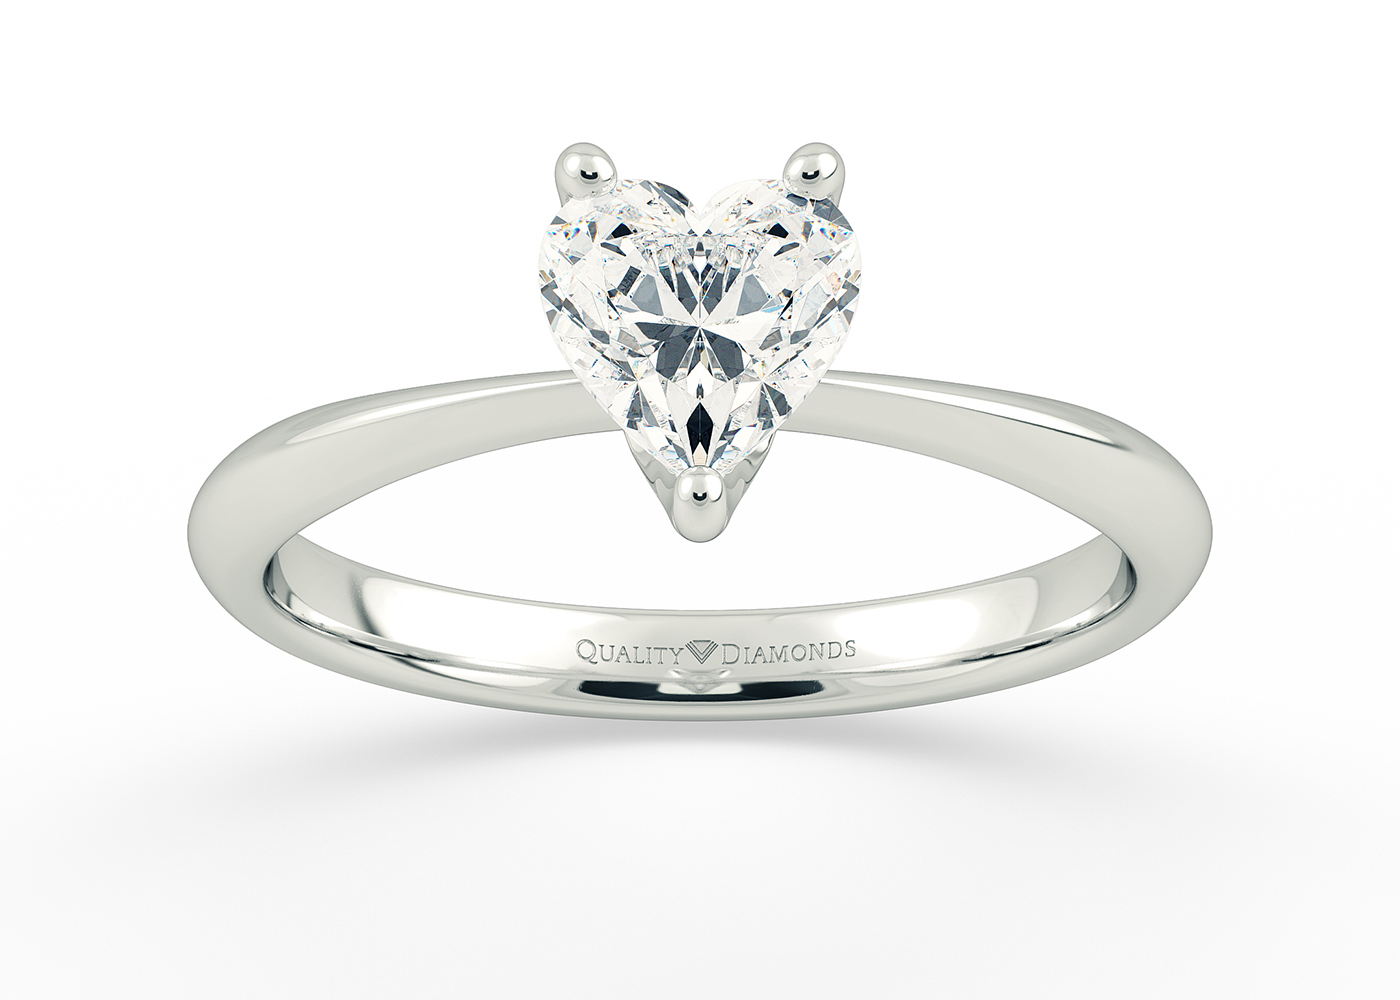 Half Carat Heart Solitaire Diamond Engagement Ring in 18K White Gold